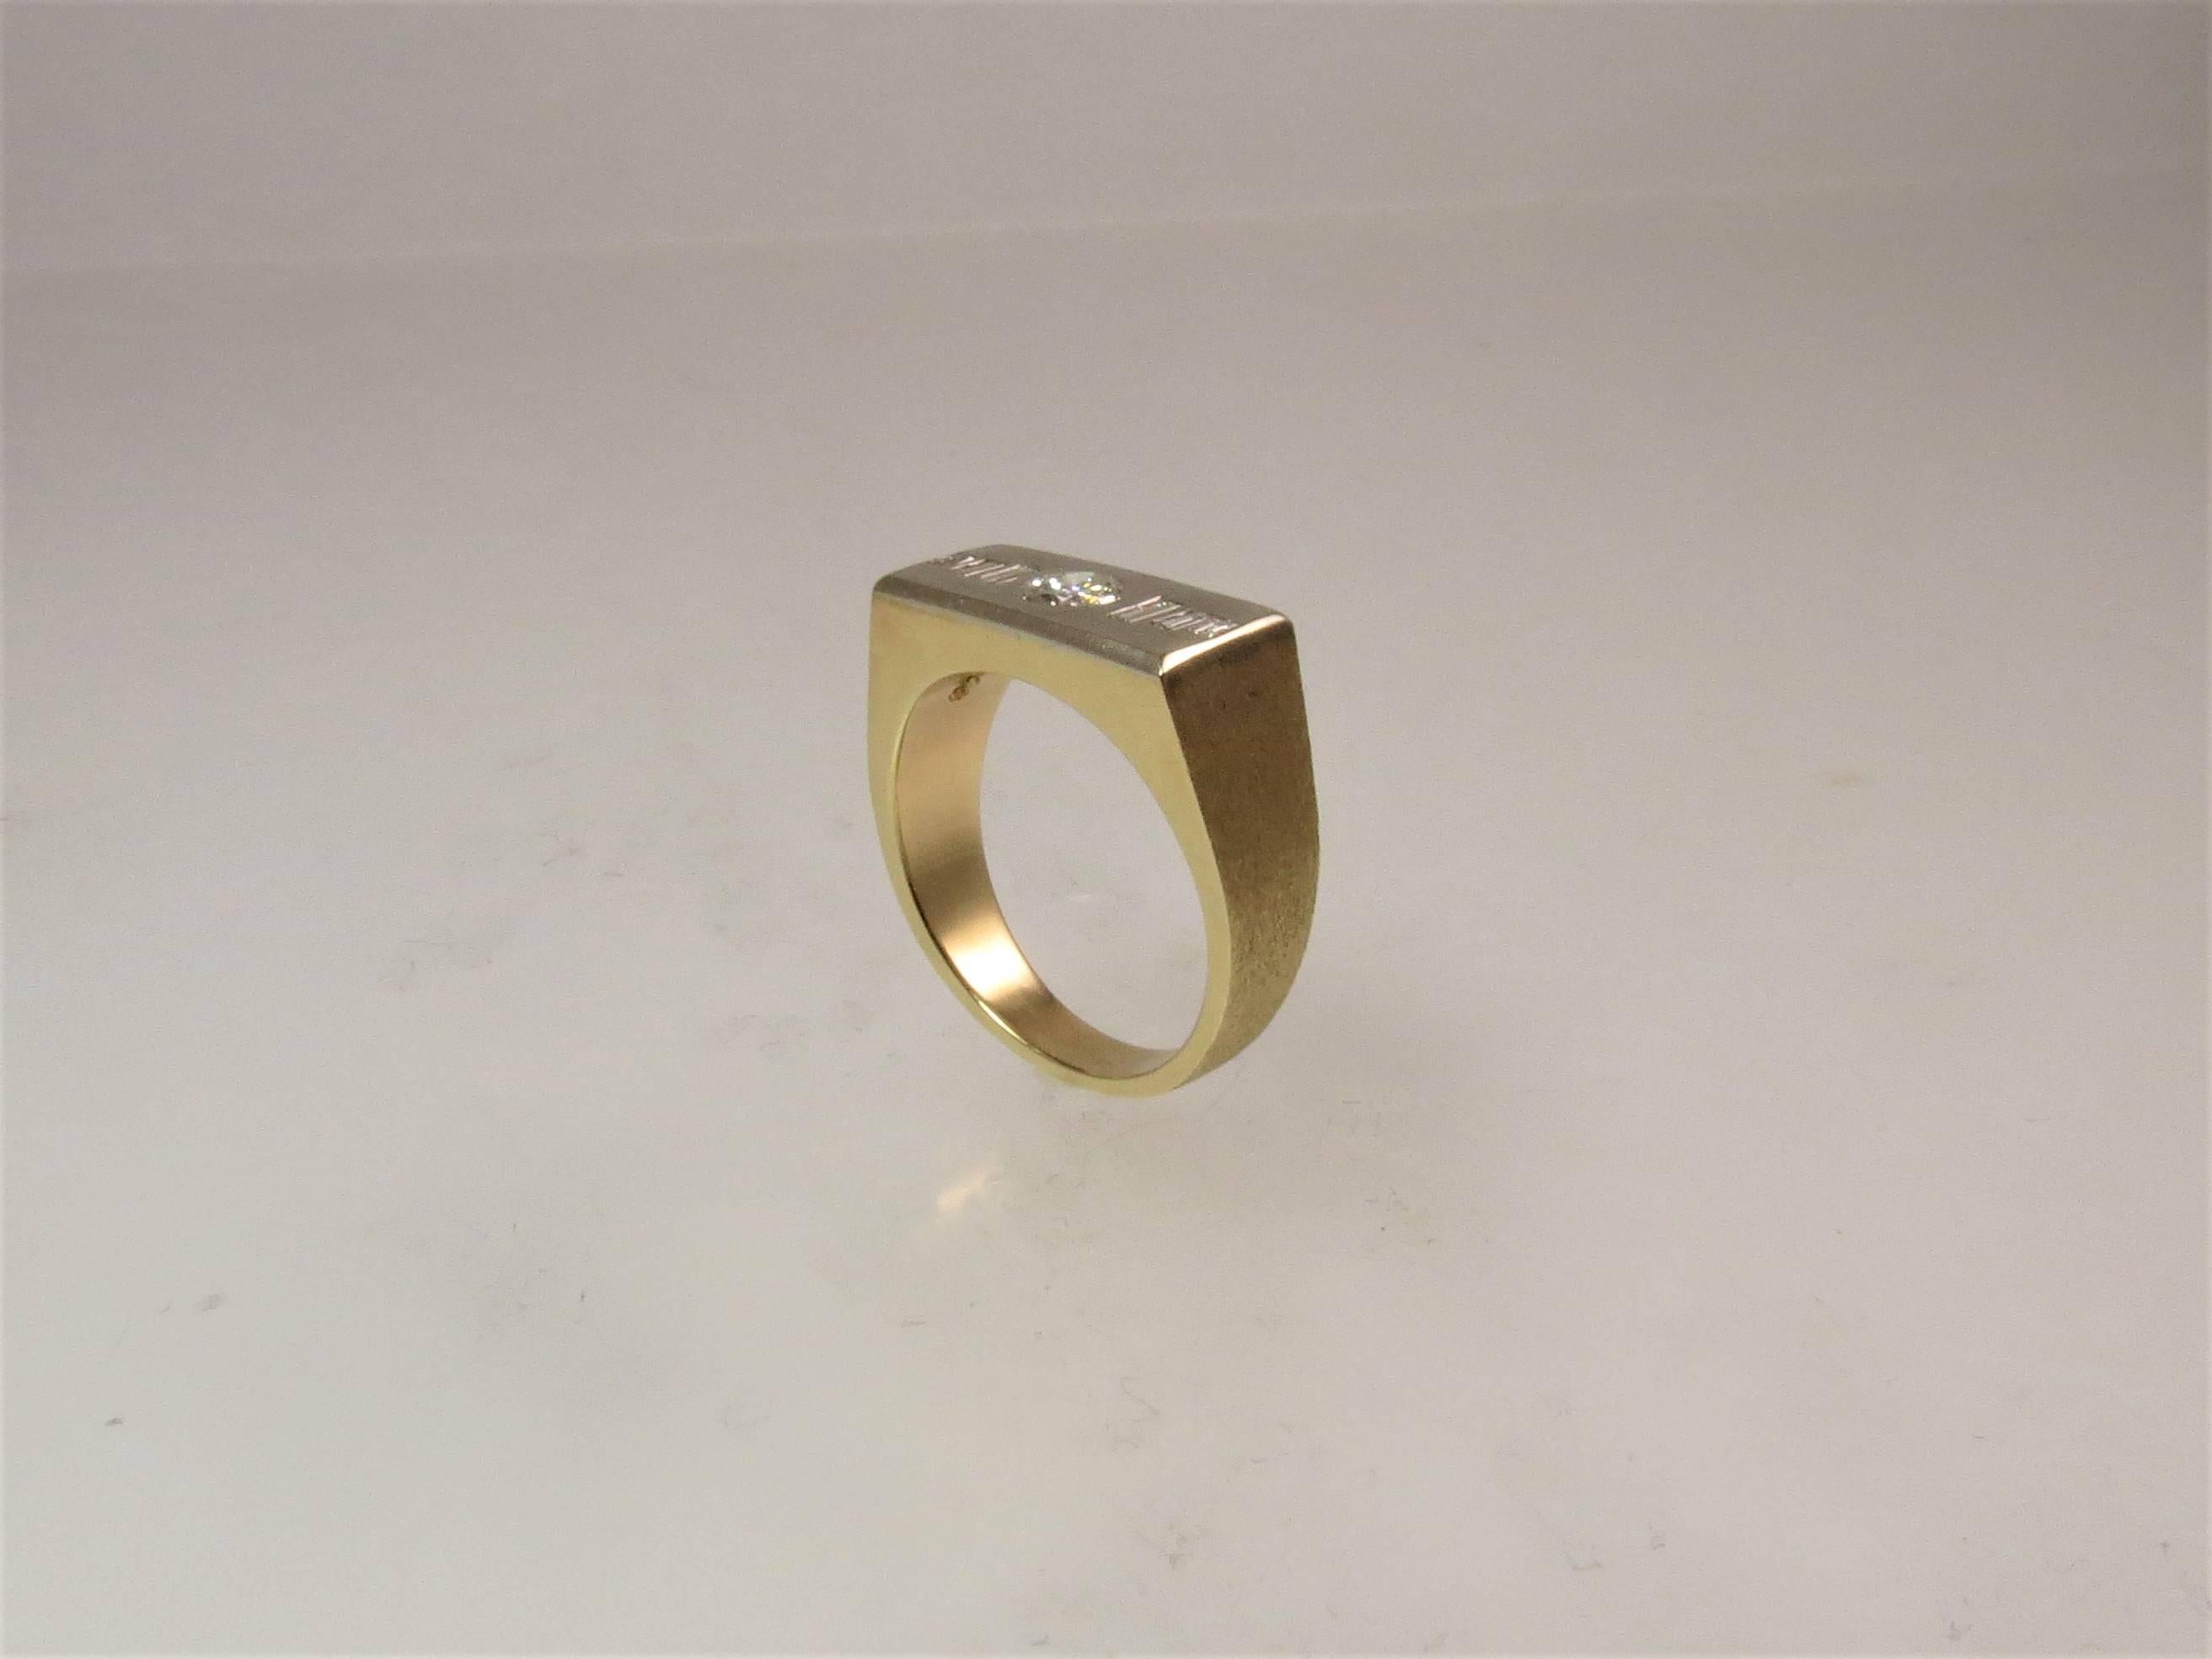 14K yellow gold gents band ring, set with one full cut round diamond weighing .25cts and 6 baguette diamonds weighing .20cts

finger size 8.5, may be sized